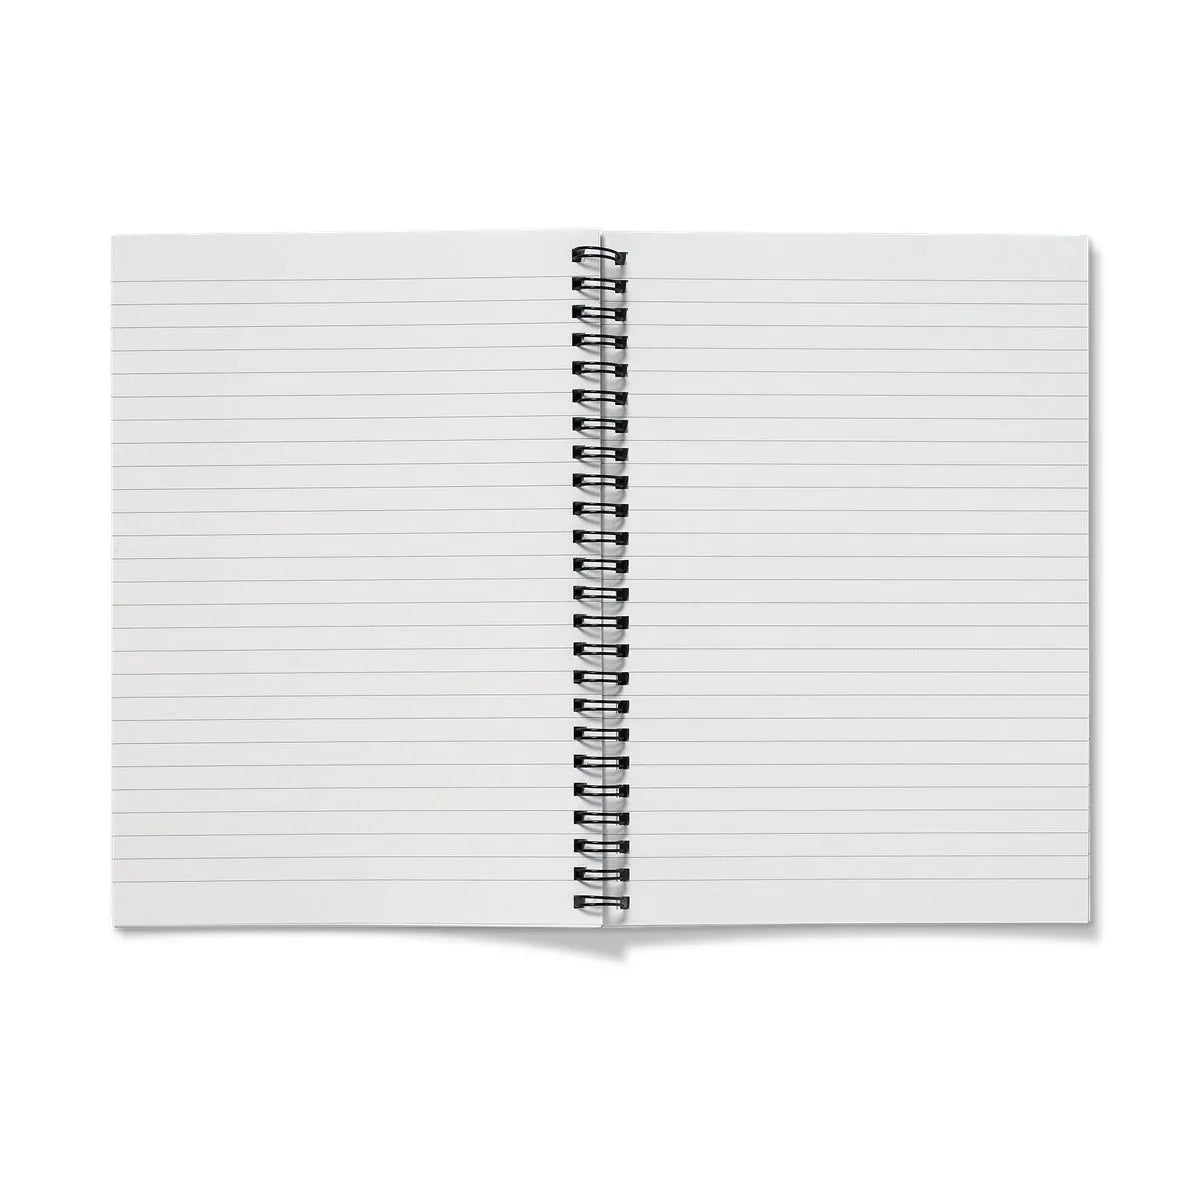 Pearly Whites Notebook - Notebooks & Notepads - Aesthetic Art